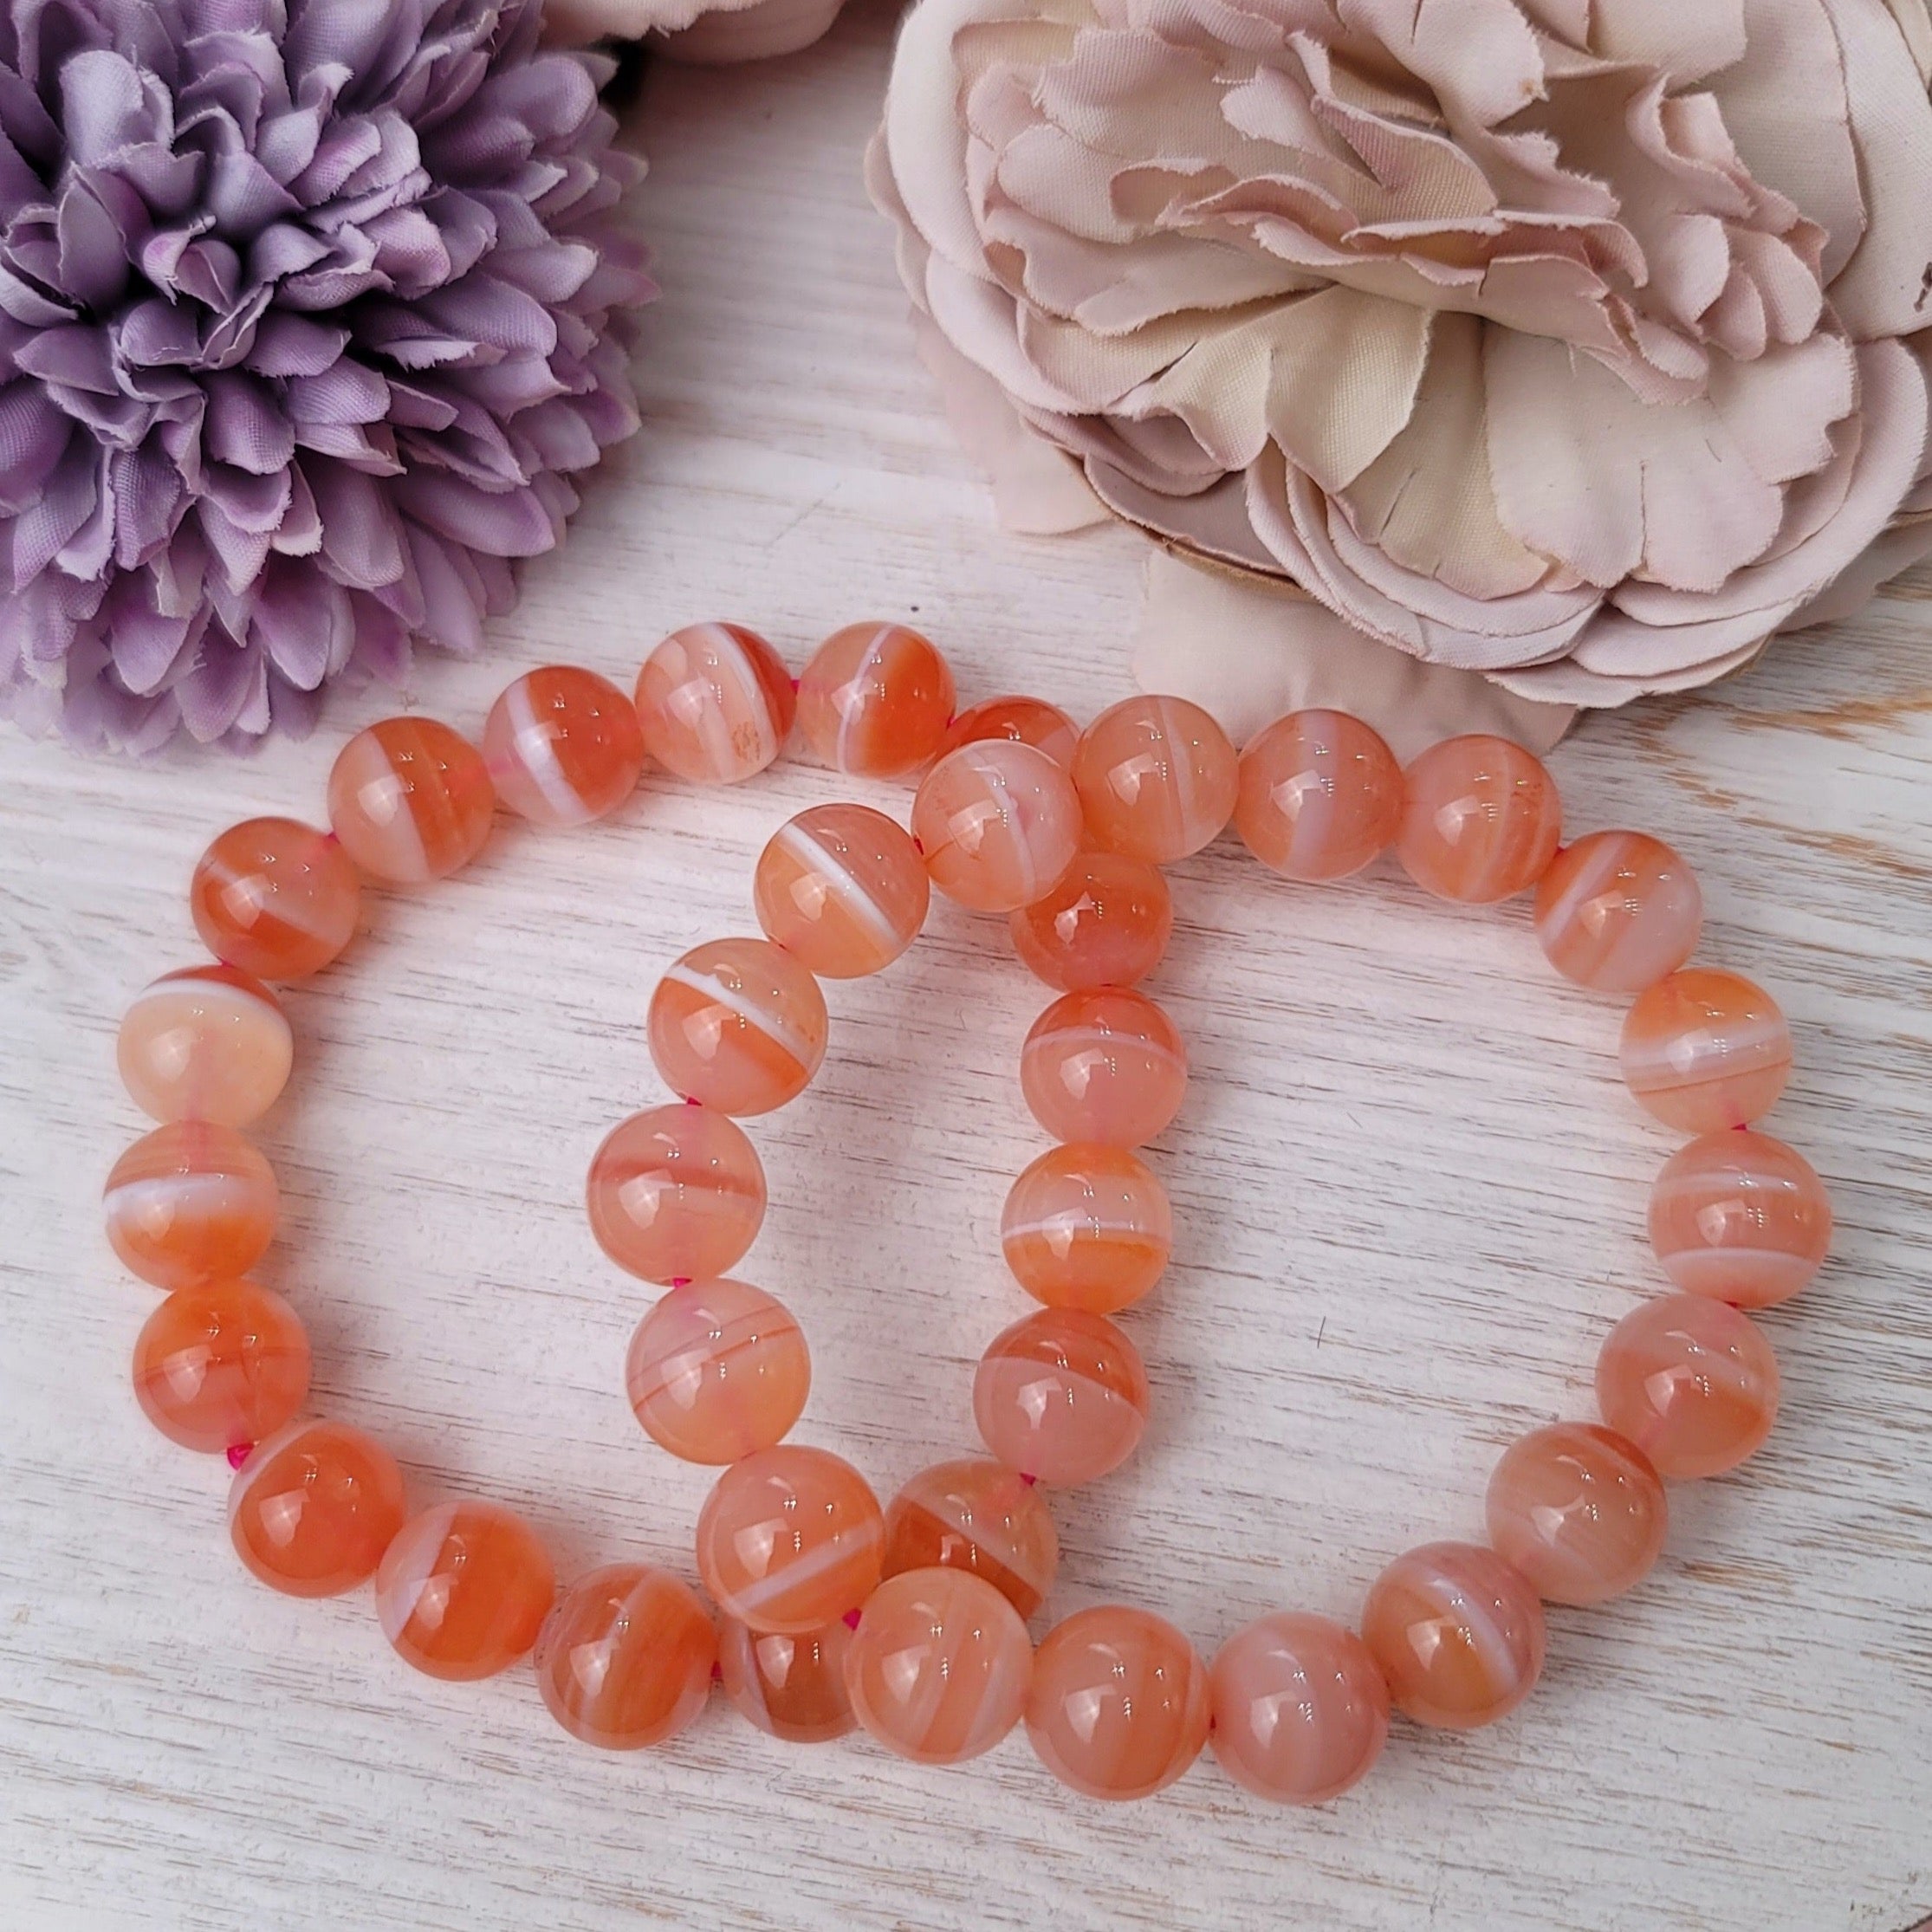 Red Botswana Agate Bracelet for Grounding and Mood Stability